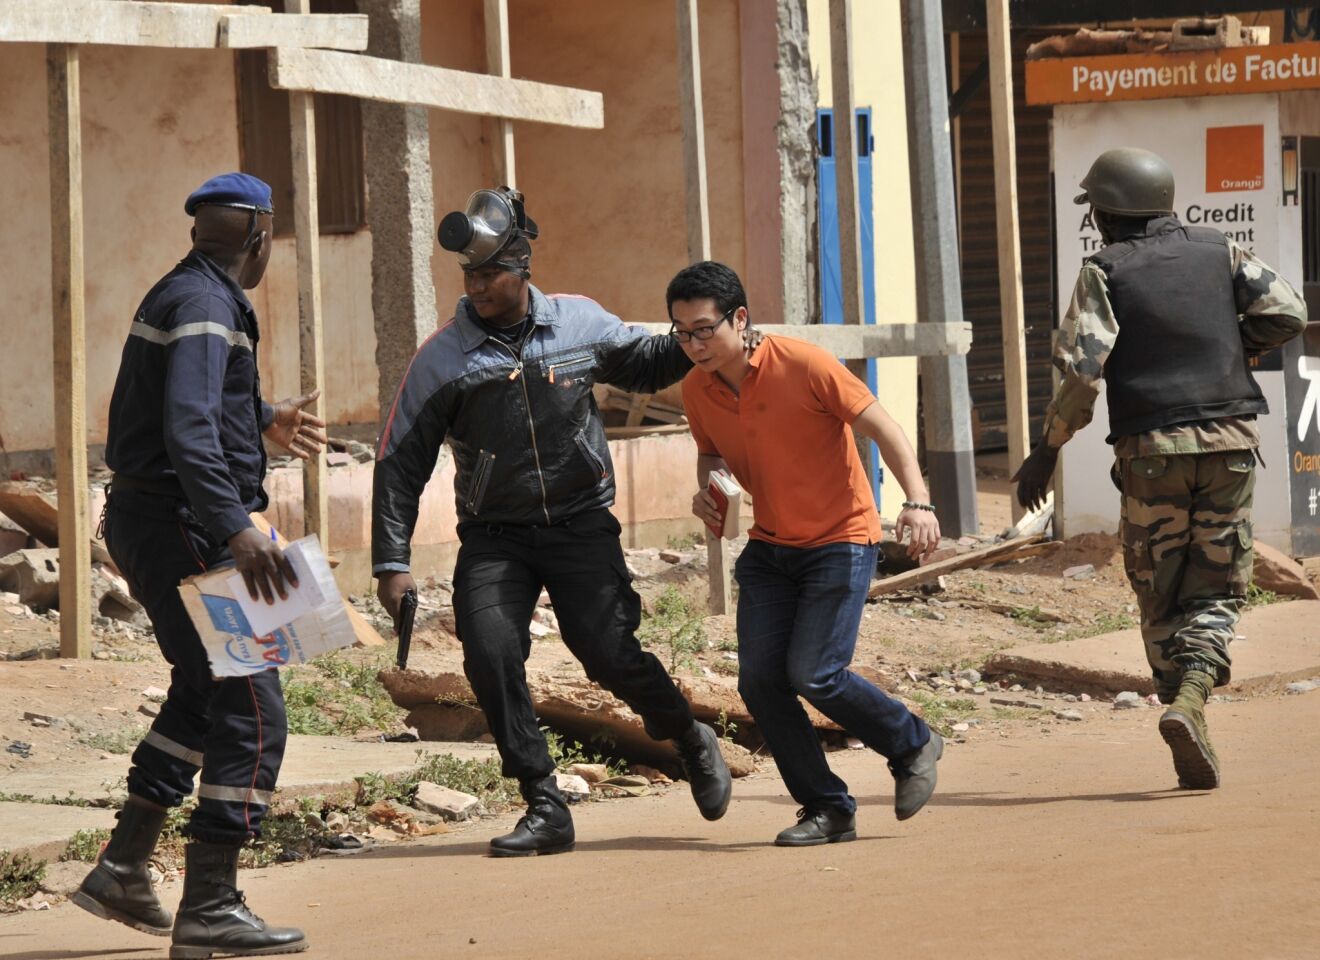 Malian security forces evacuate a man from an area surrounding the Radisson Blu hotel in Bamako.